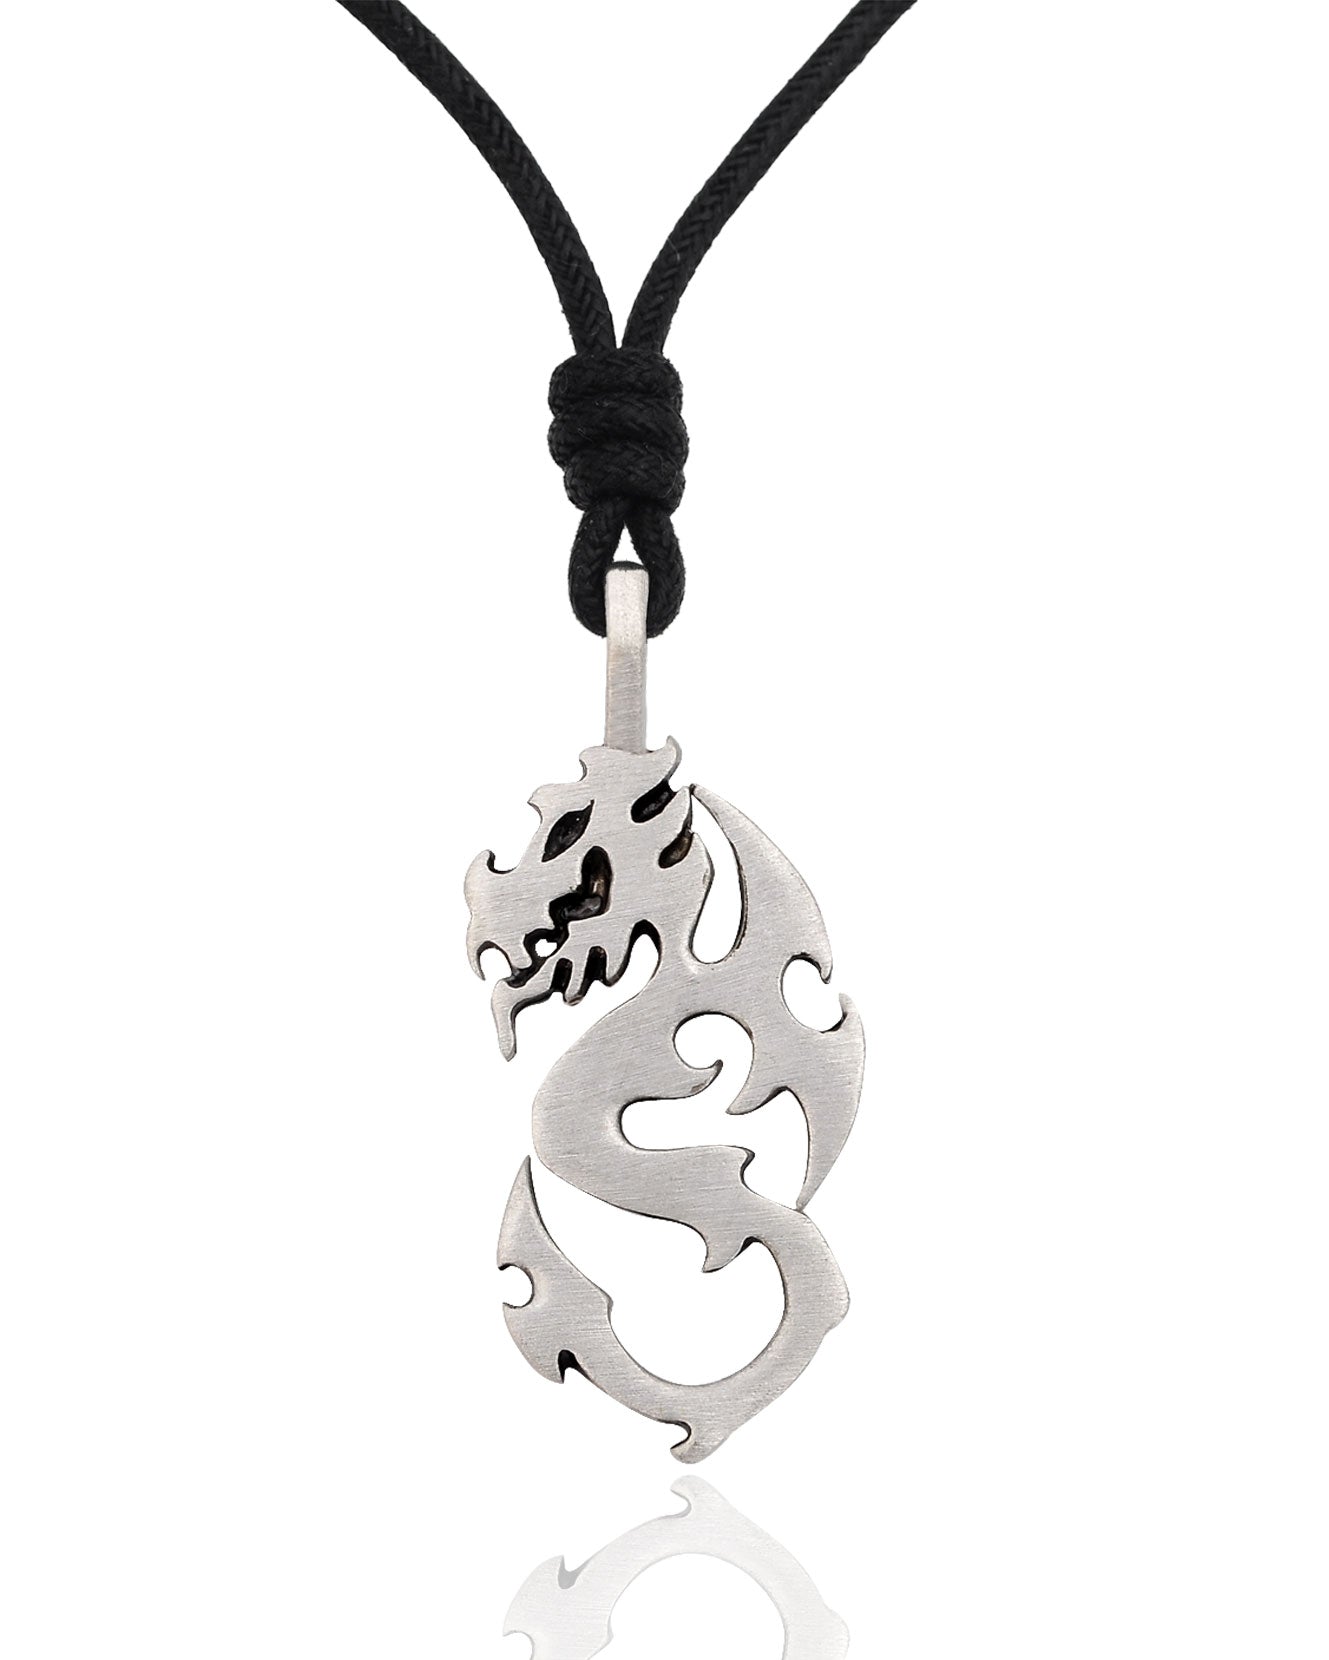 Trendy New Dragon Silver Pewter Charm Necklace Pendant Jewelry